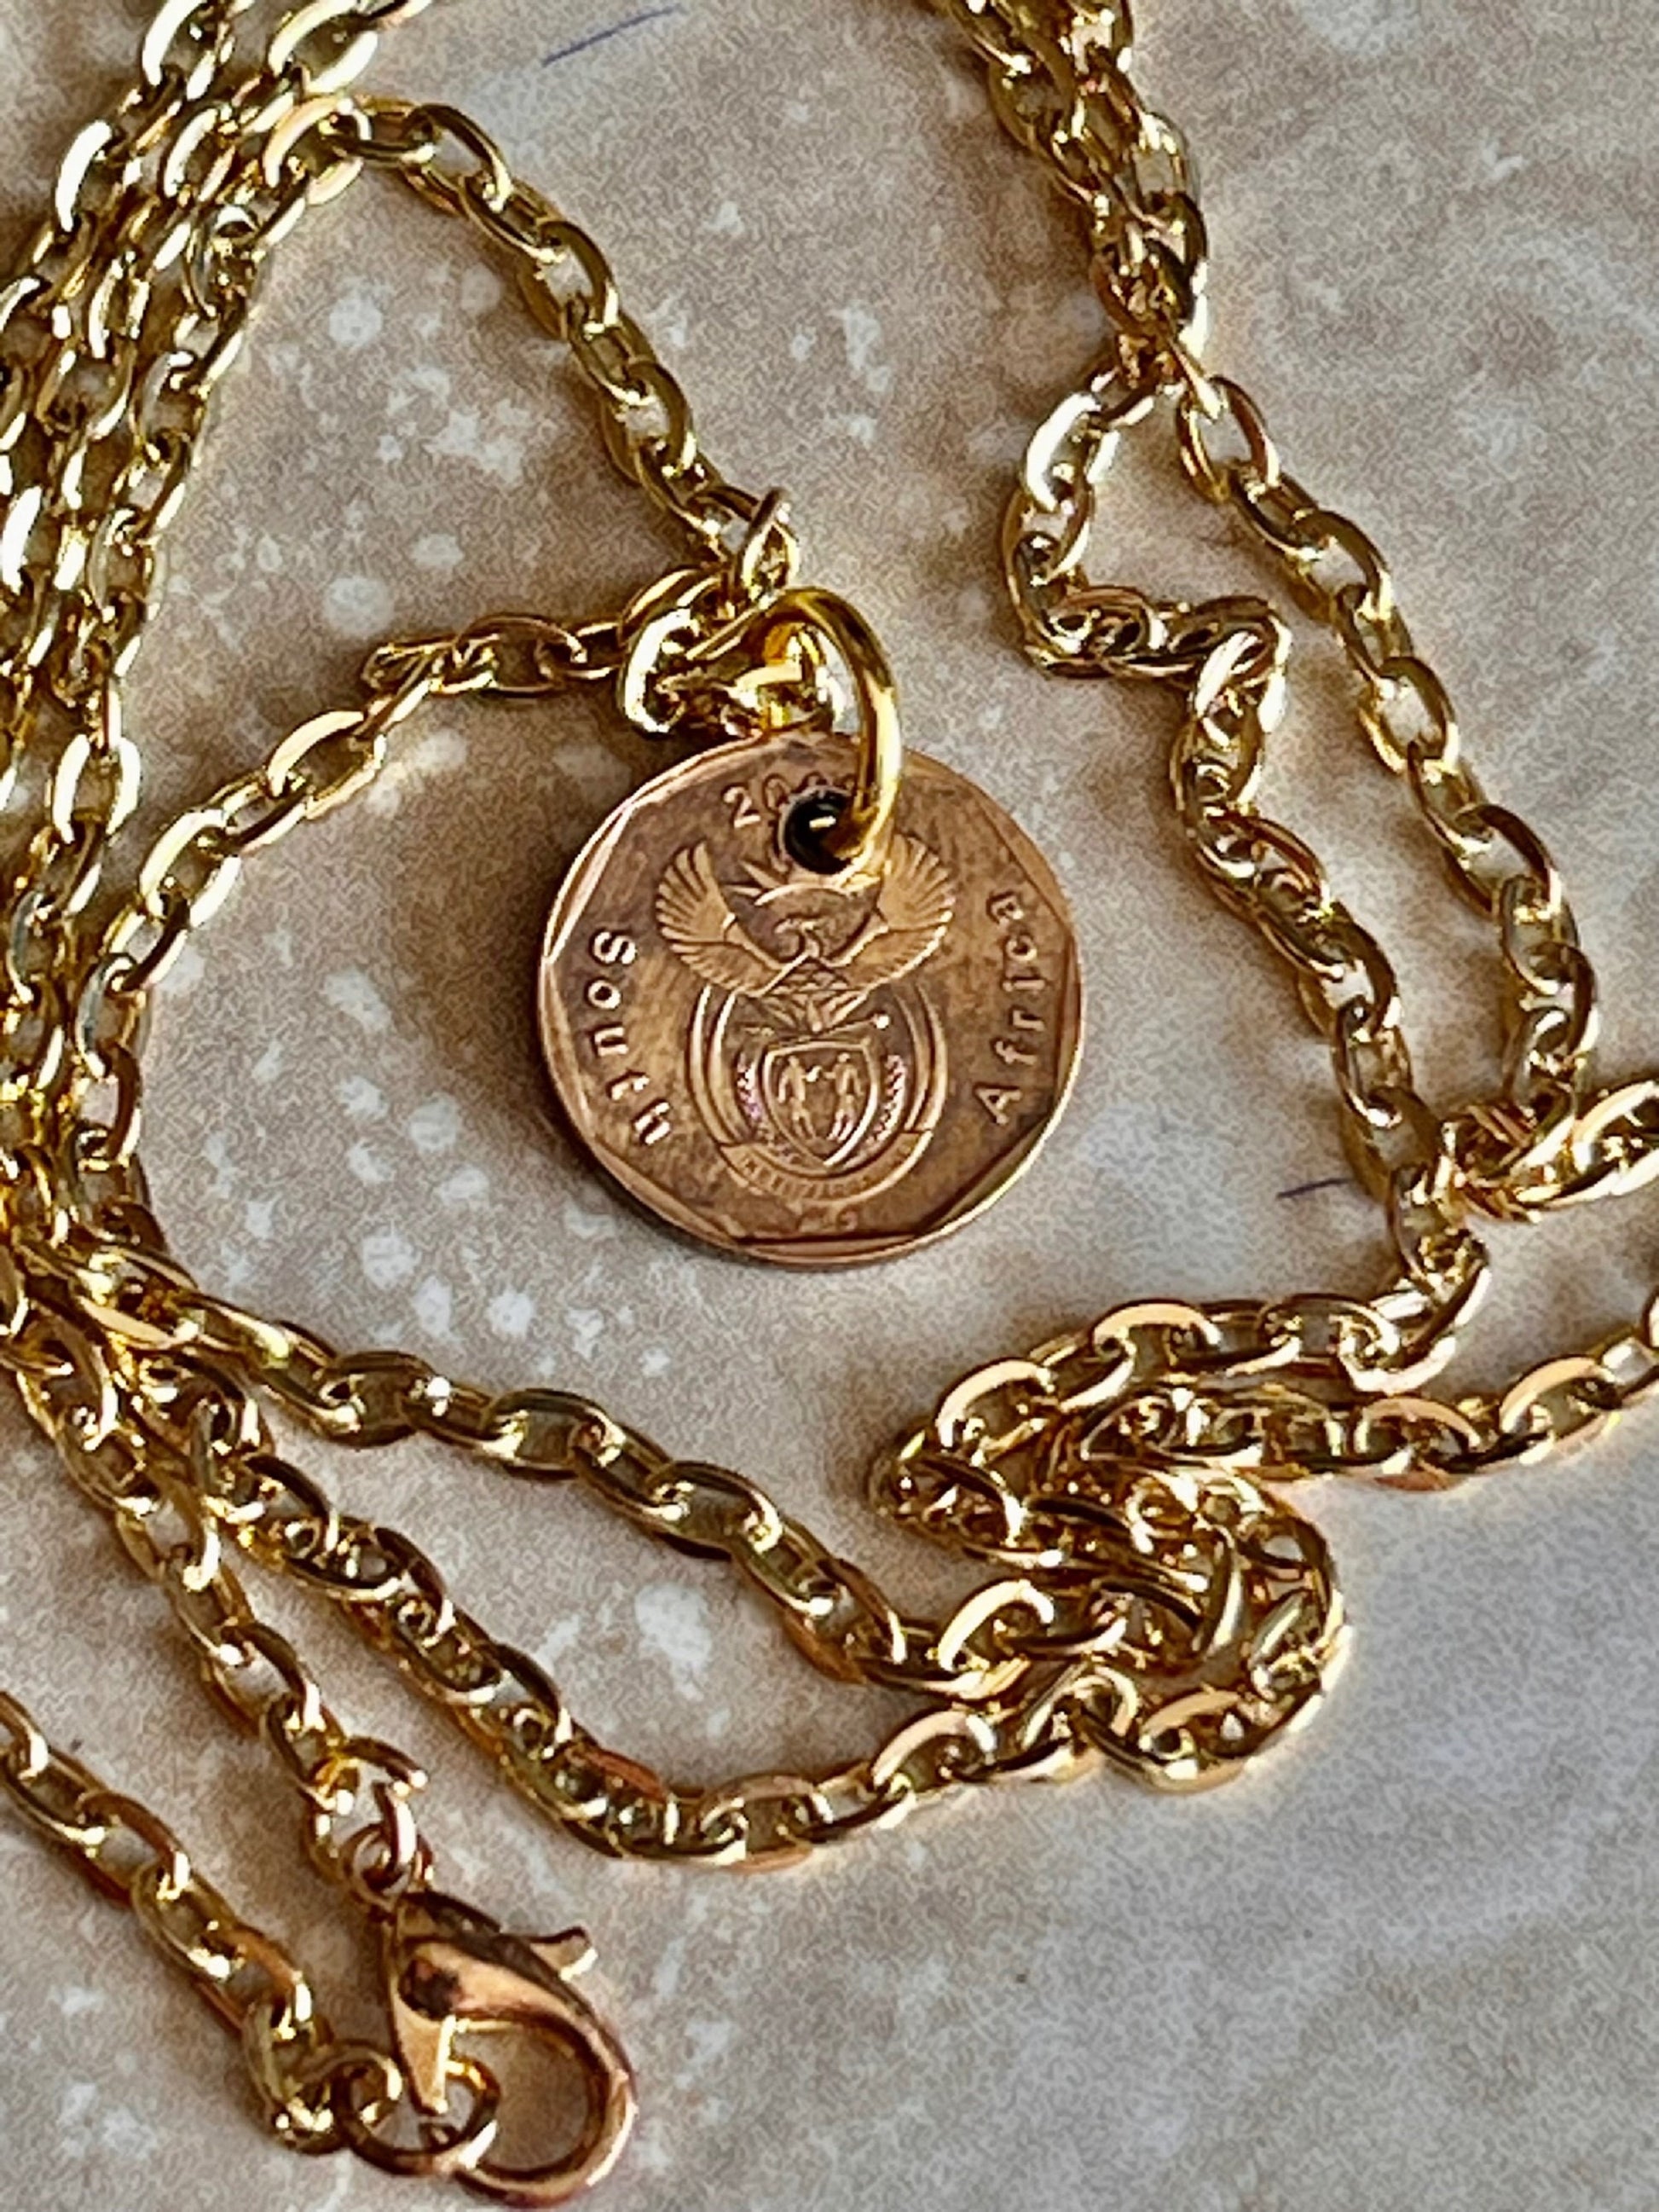 South Africa Coin Pendant African 10 Cents Personal Necklace Old Vintage Handmade Jewelry Gift Friend Charm For Him Her World Coin Collector